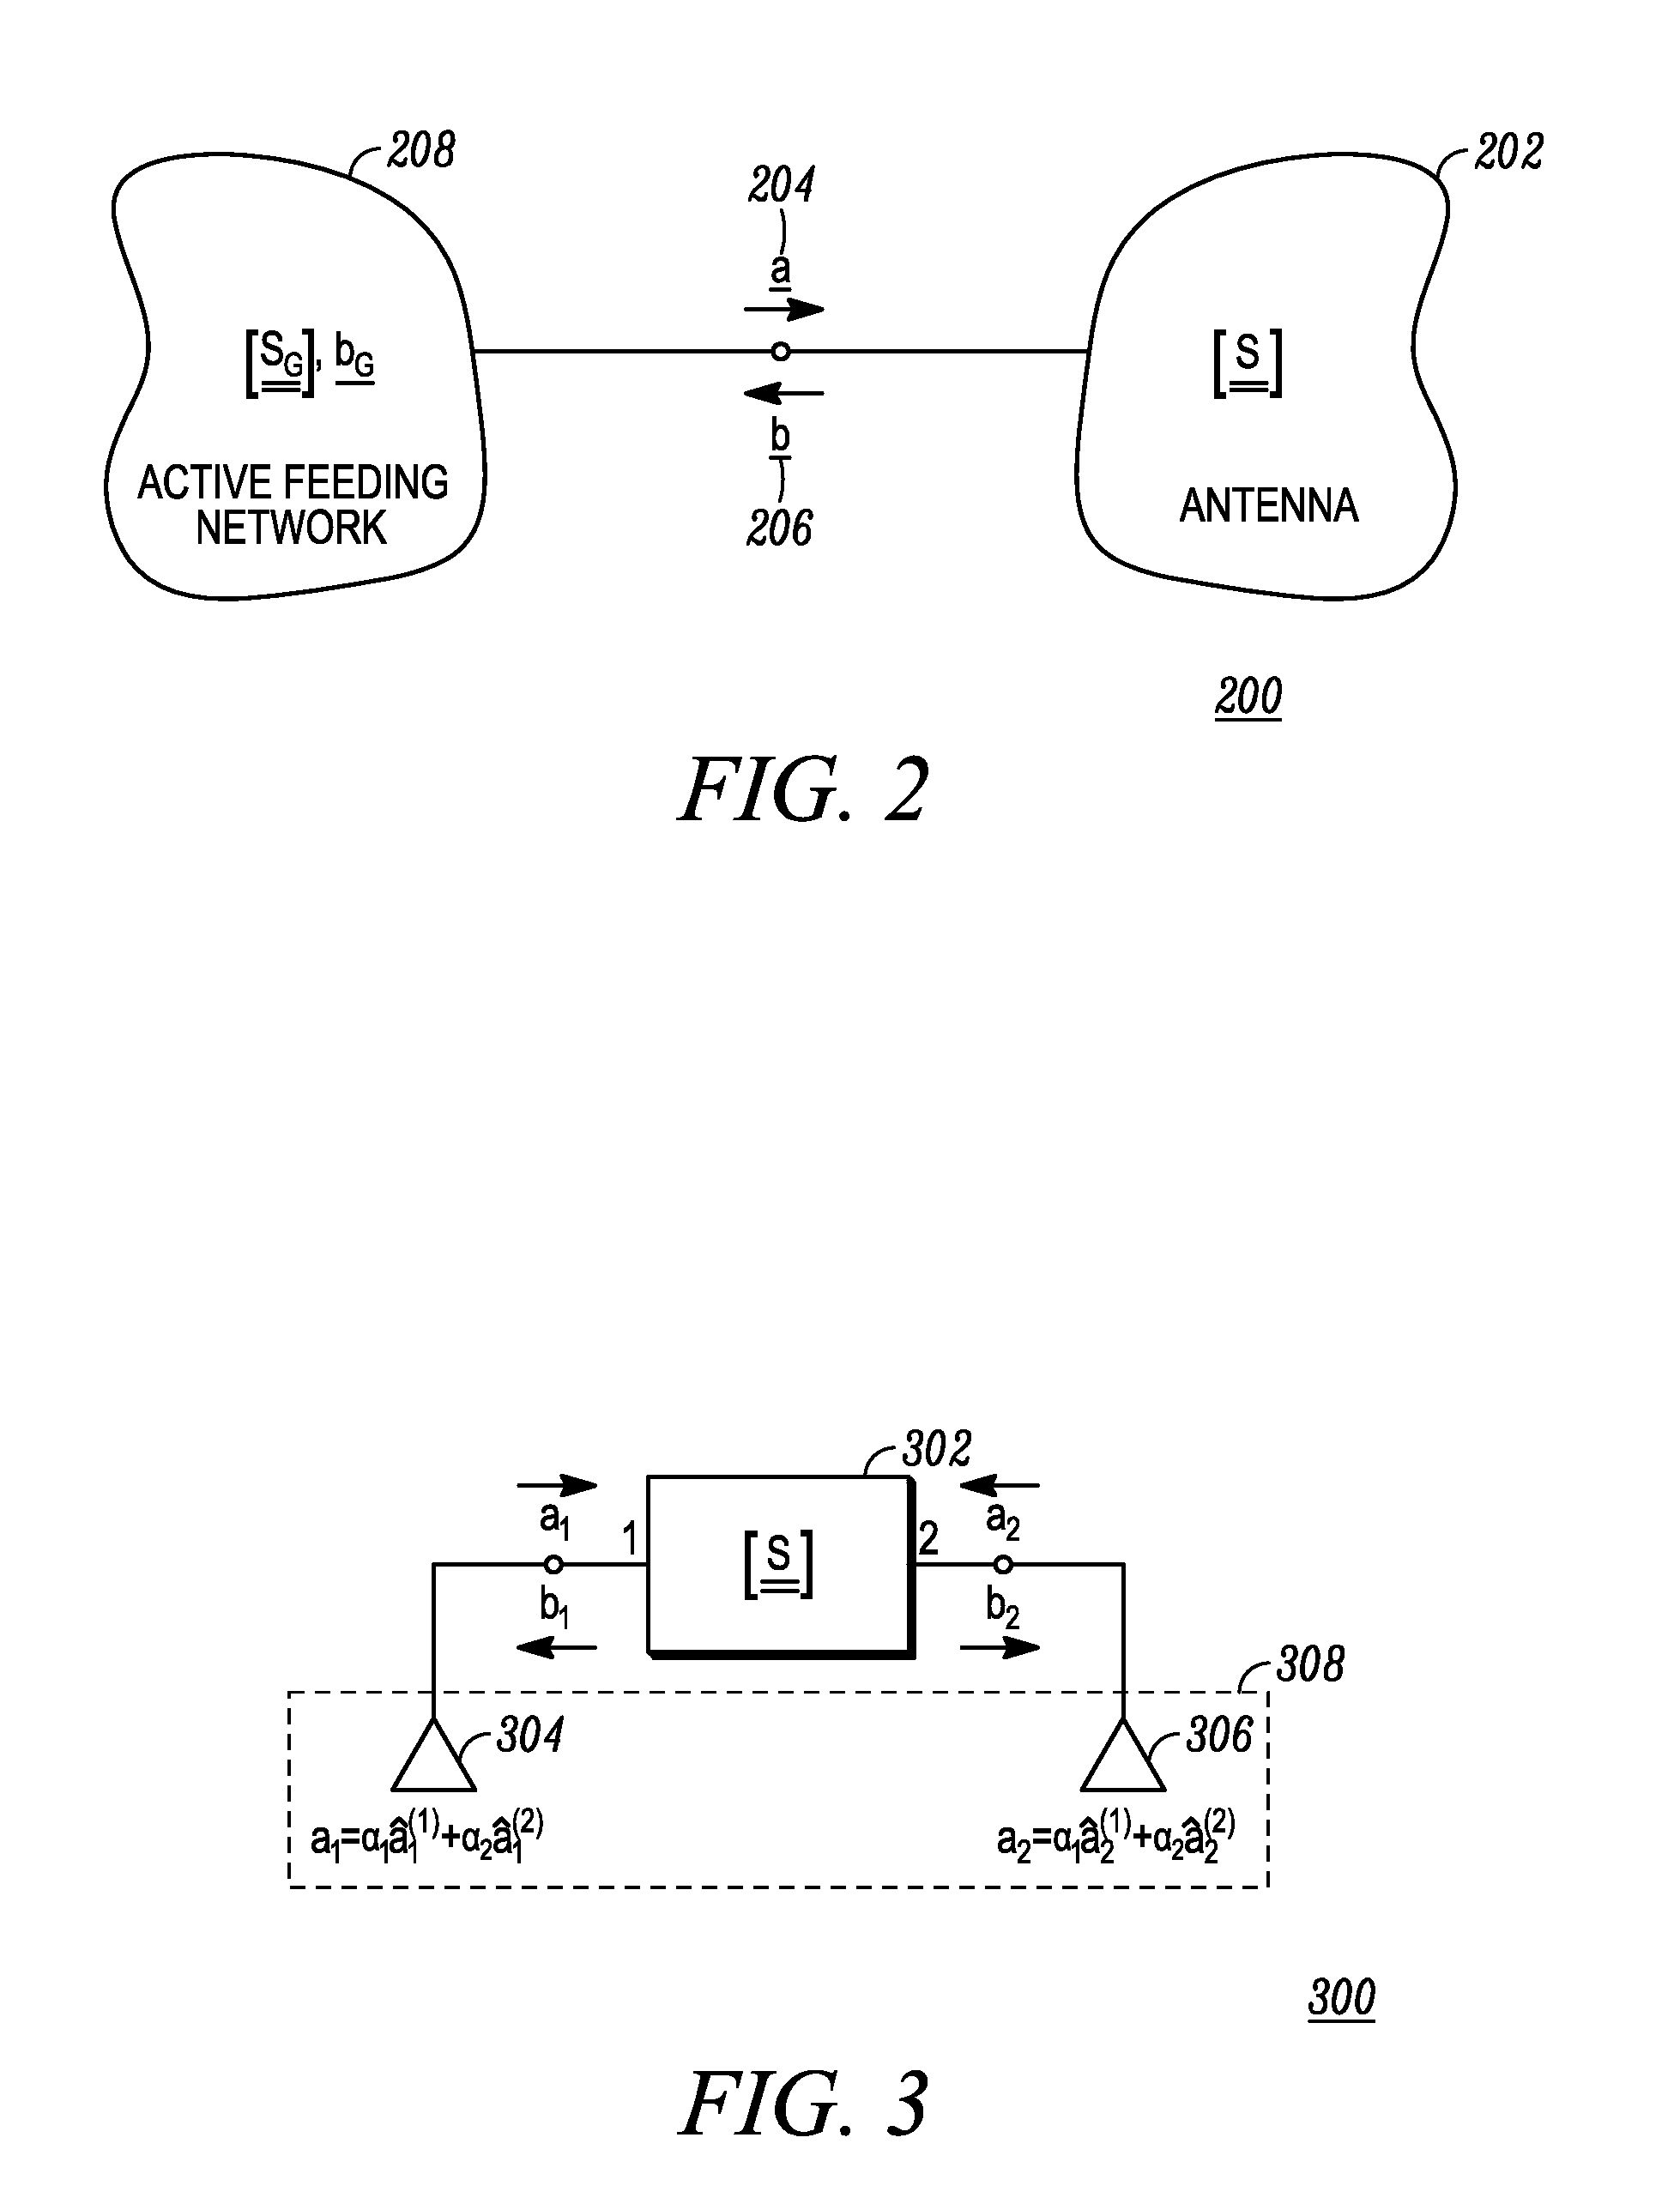 Multiple-input multiple-output (MIMO) antenna system